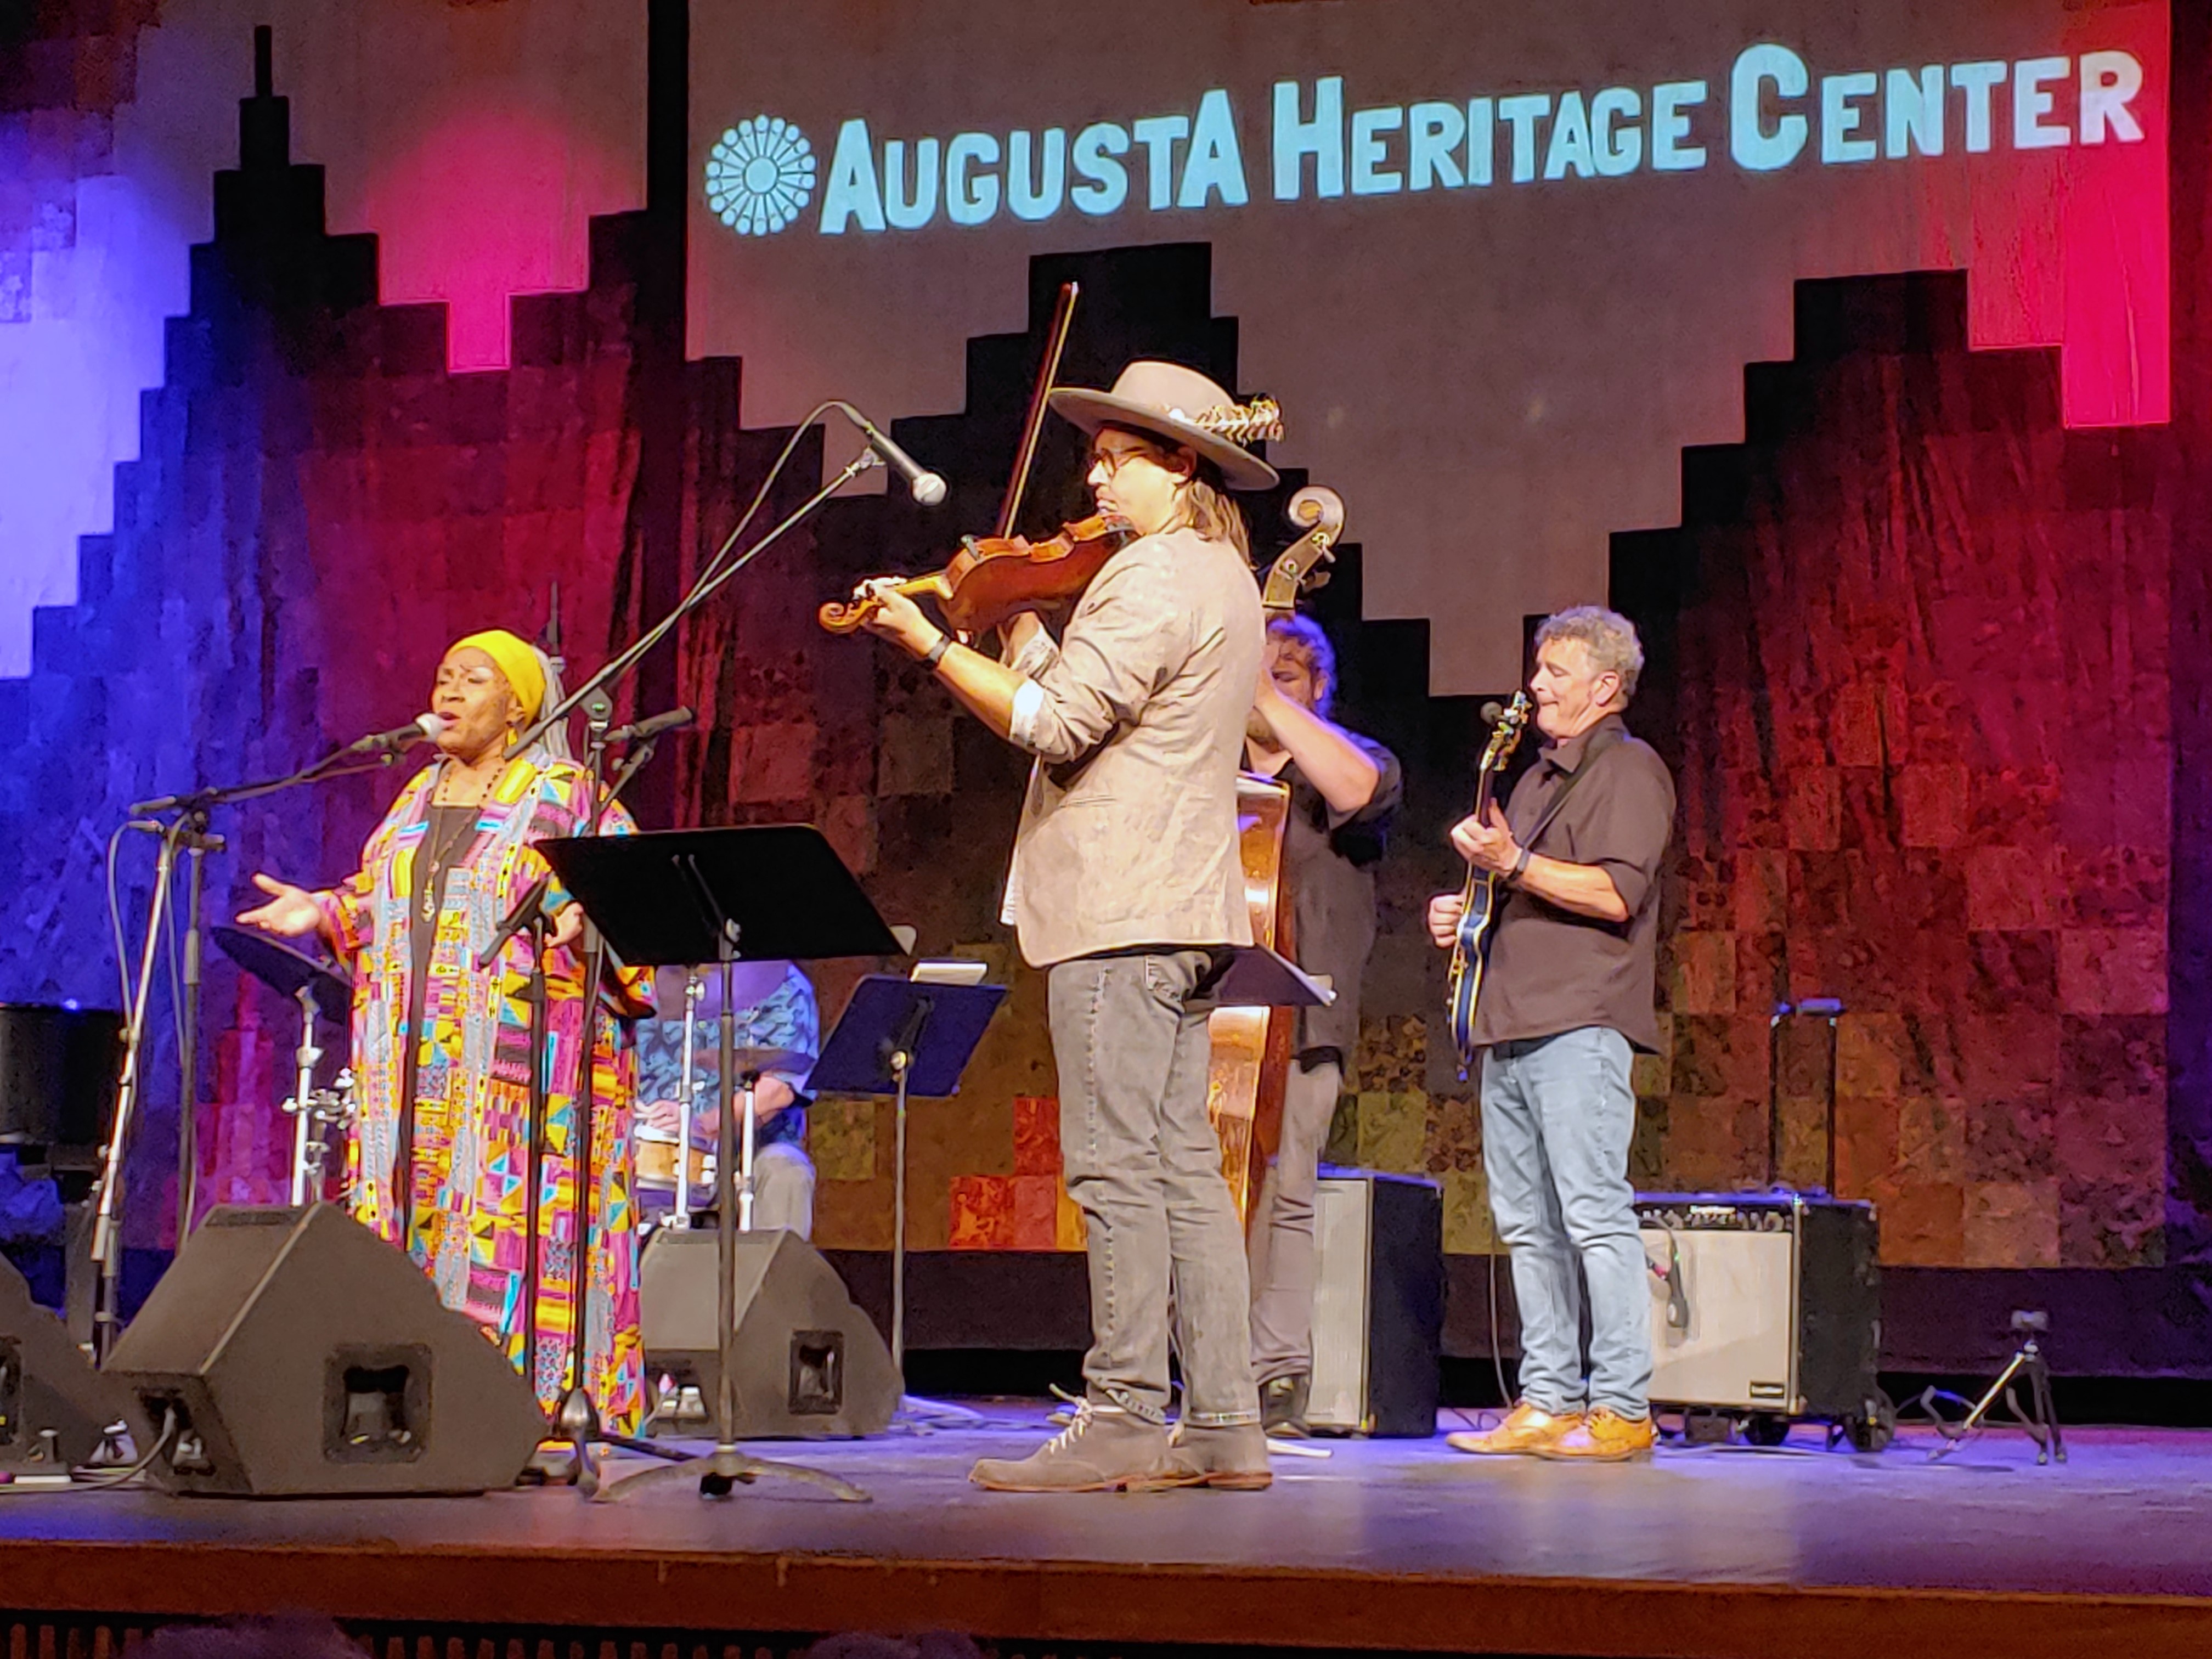 A stage performance with five musicians. The backdrop is designed to look like a quilted mountain range with the Augusta Heritage Center logo projected onto it.